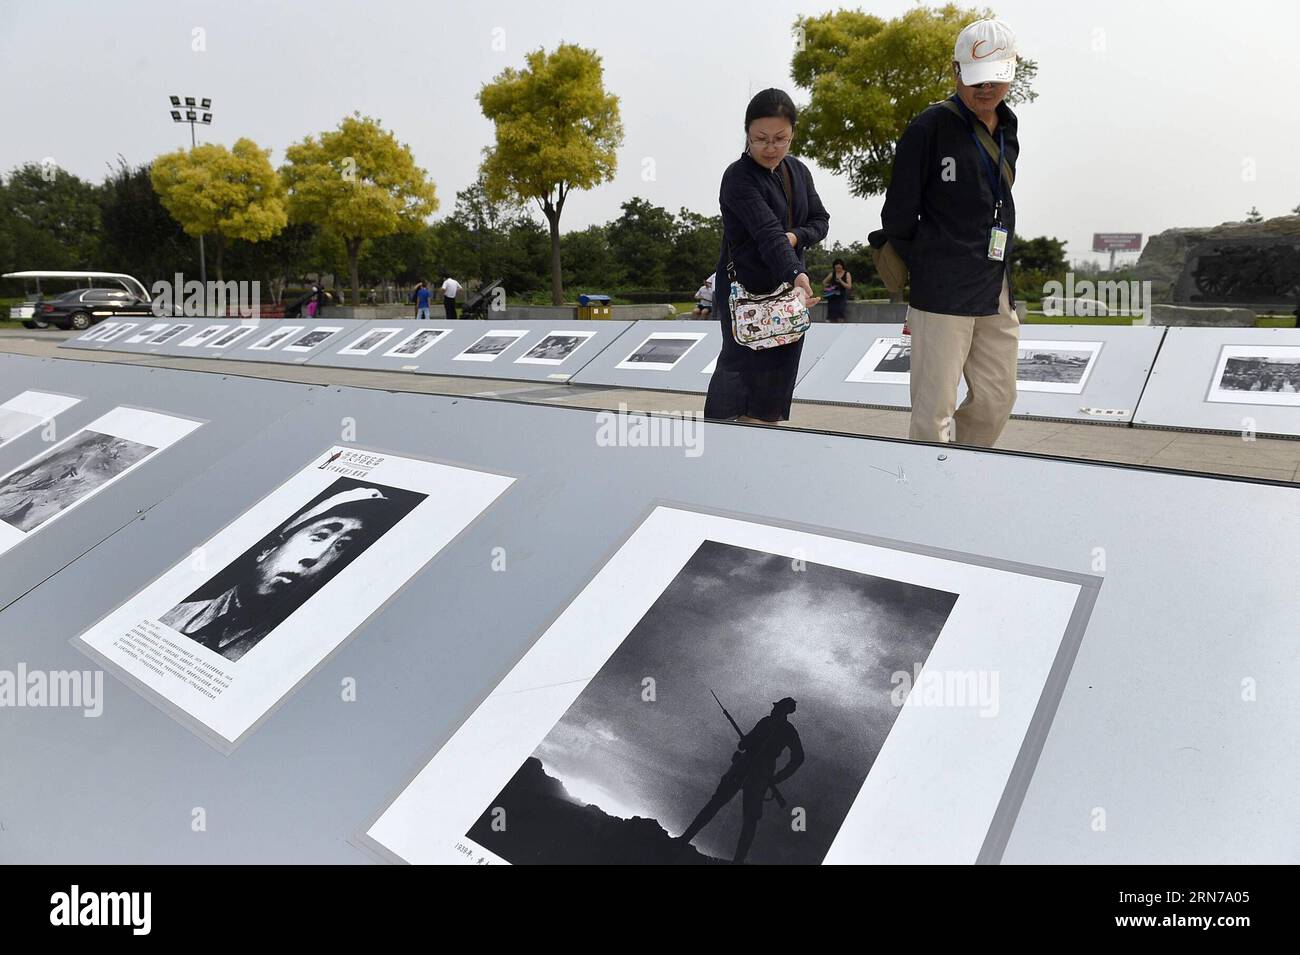 (150829) -- BEIJING, Aug. 29, 2015 -- People look at file pictures at Lugou Bridge where Japan launched the all-out war of aggression against China, in Beijing, Capital of China, Aug. 29, 2015. China will stage a military parade on Sept. 3 to commemorate the 70th anniversary of the victory of the Chinese People s War of Resistance Against Japanese Aggression and the World Anti-Fascist War. ) (dhf) CHINA-BEIJING-COUNTER-JAPANESE WAR OF AGGRESSION-SITE-VISIT (CN) PengxZhaozhi PUBLICATIONxNOTxINxCHN   150829 Beijing Aug 29 2015 Celebrities Look AT File Pictures AT Lugou Bridge Where Japan launche Stock Photo